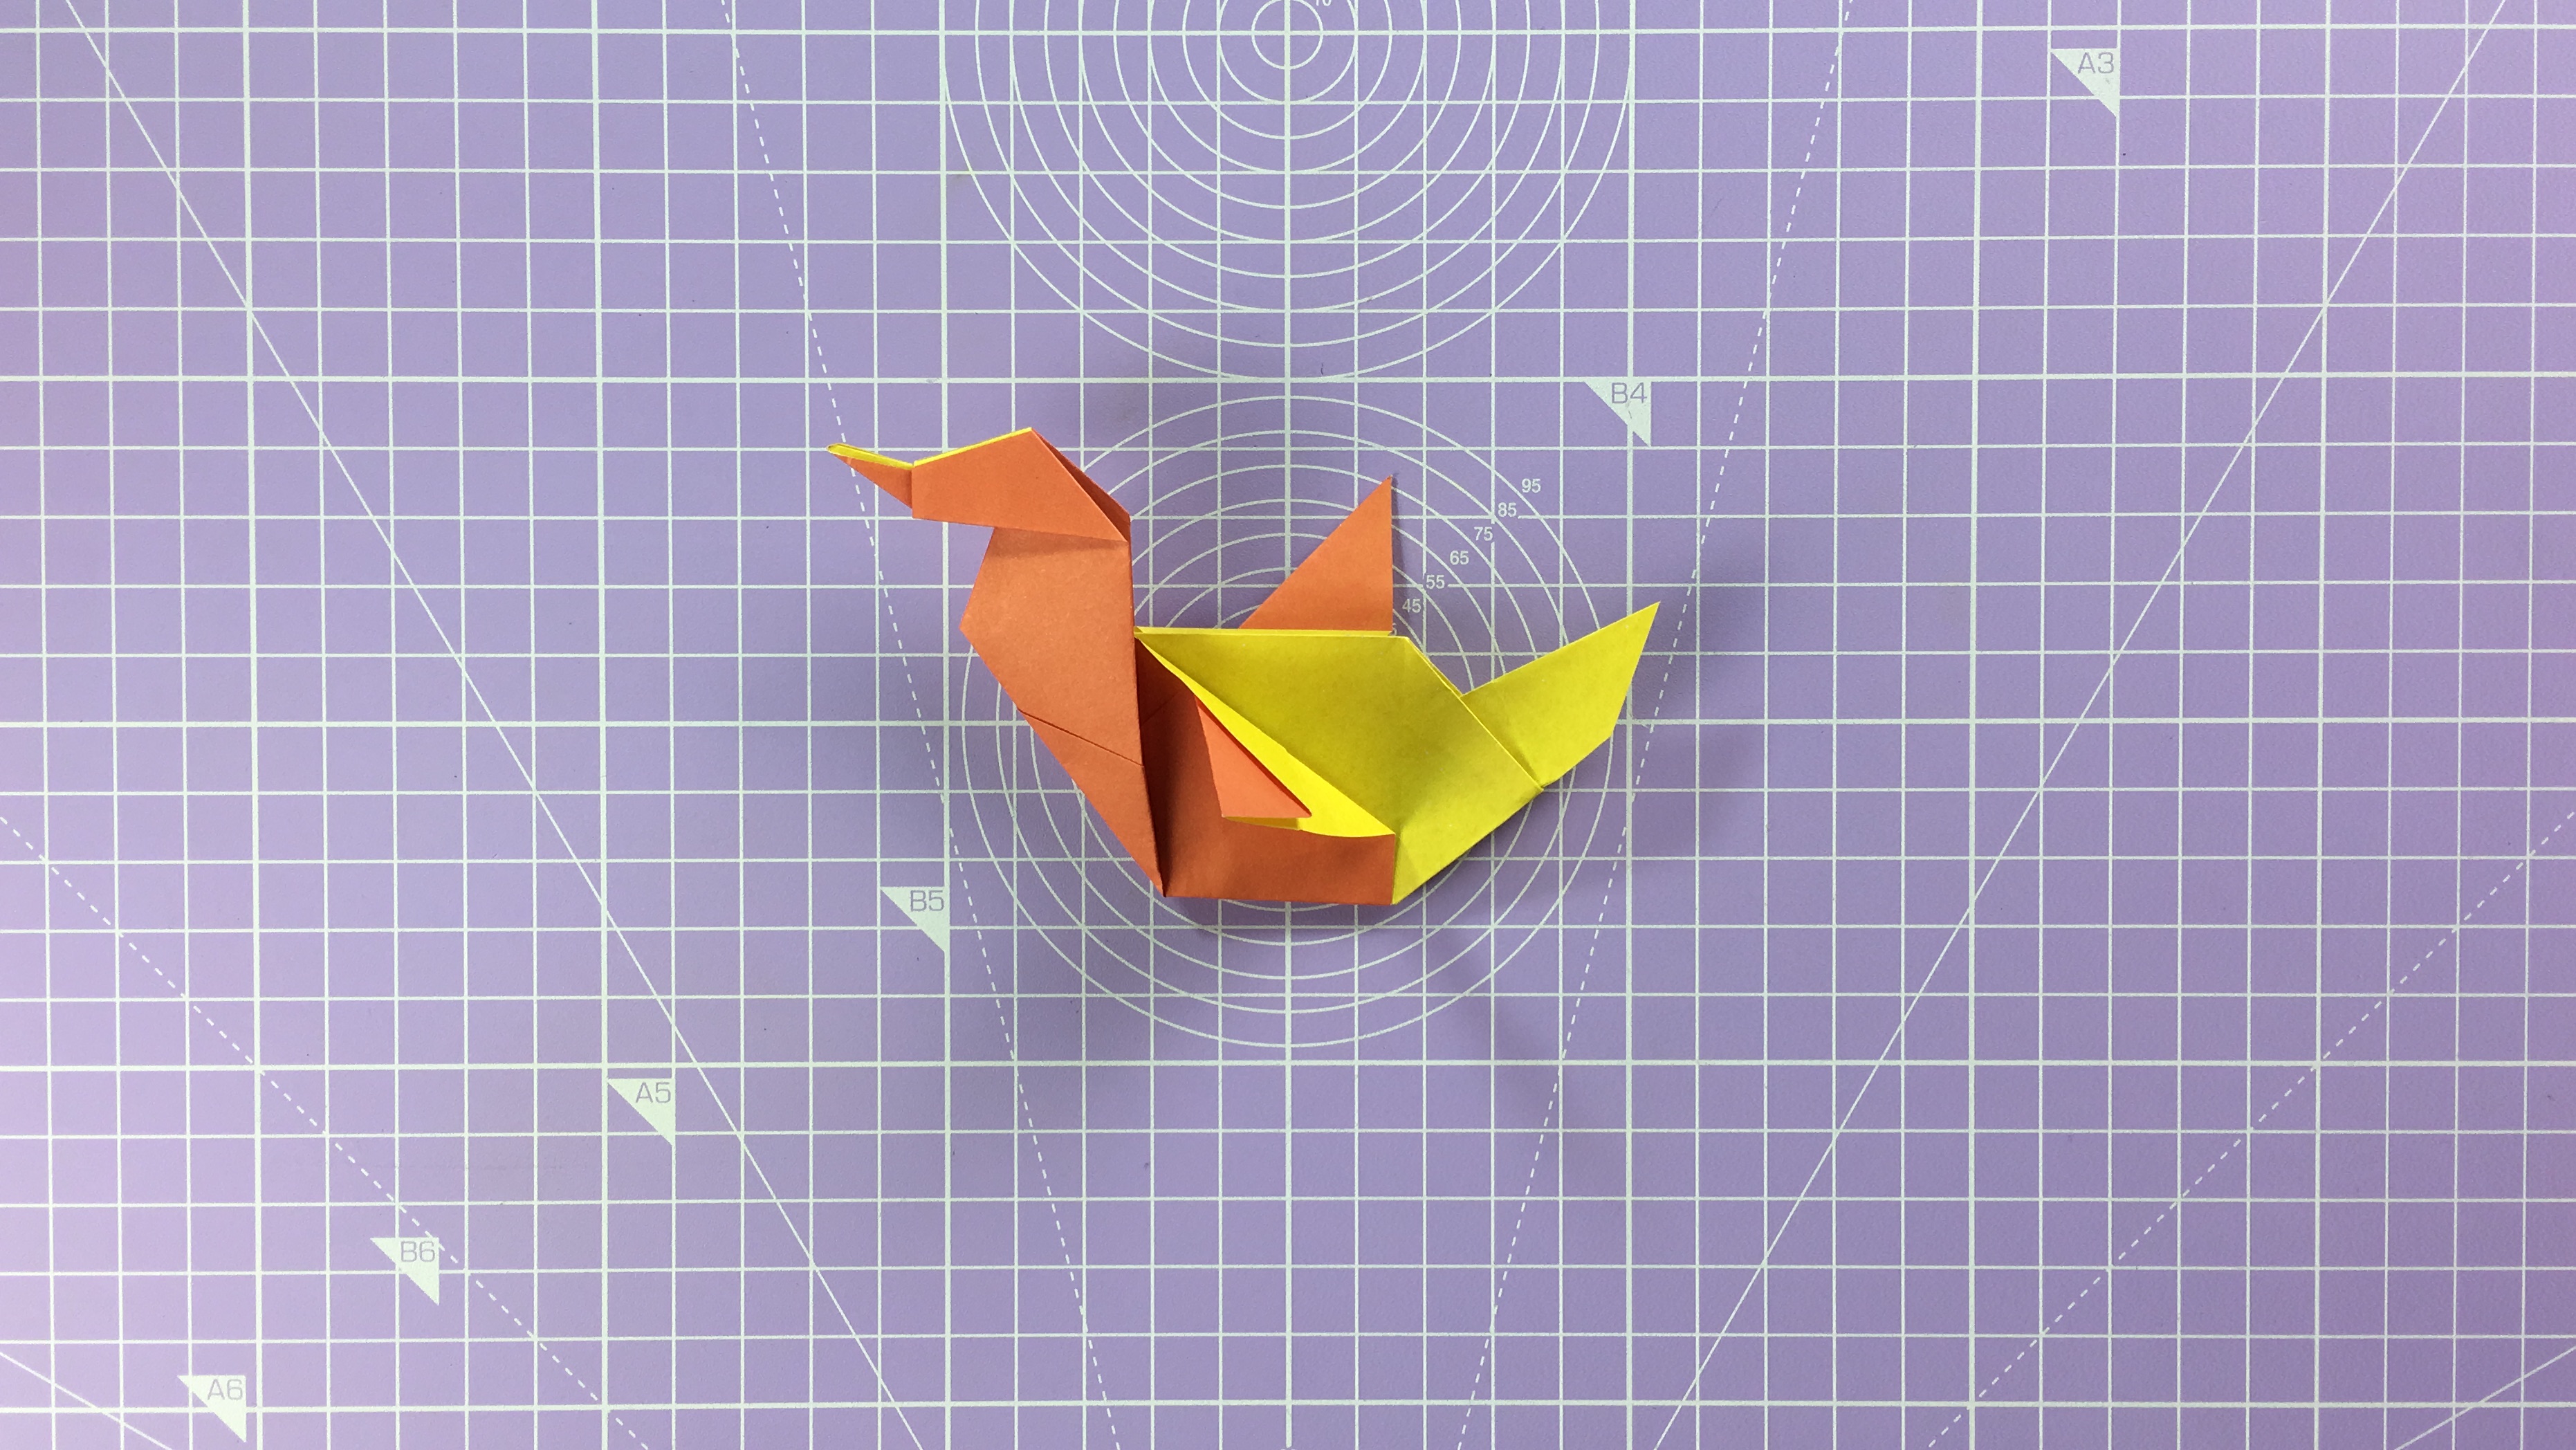 How to make an origami duck - step 22c